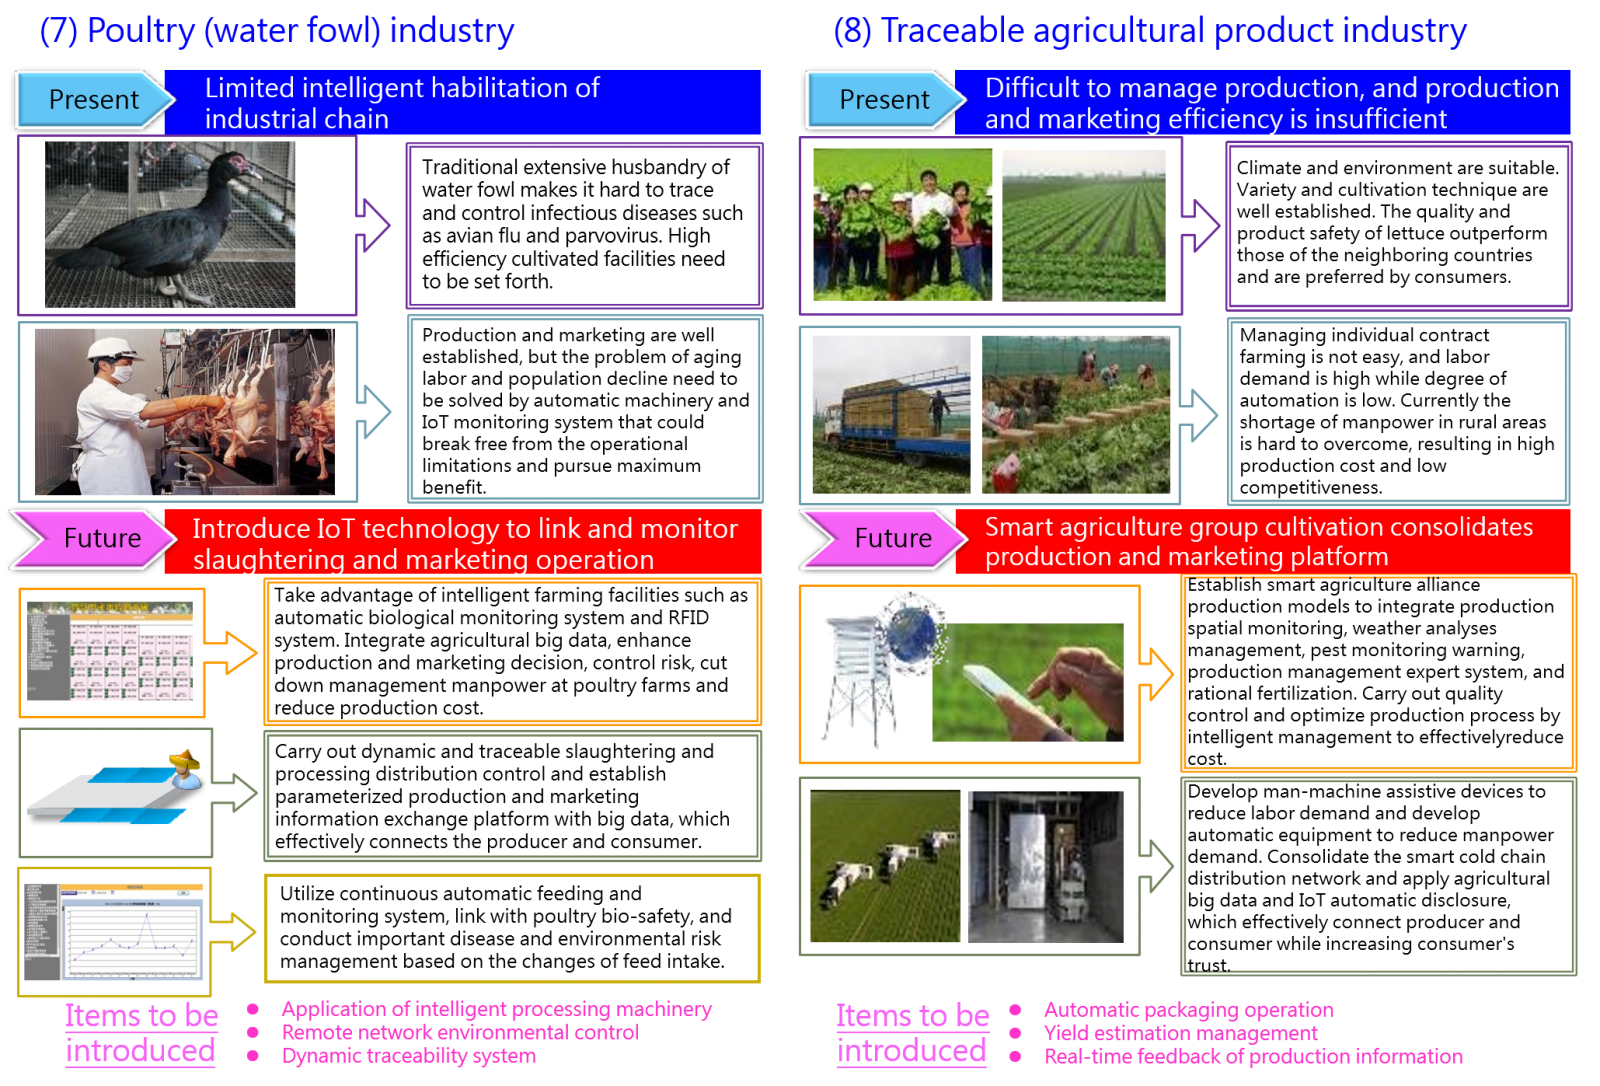 Figure 6: Current technological applications of Poultry (water fowl) and traceable agricultural product industries, and application objectives after implementing Smart Agriculture 4.0.